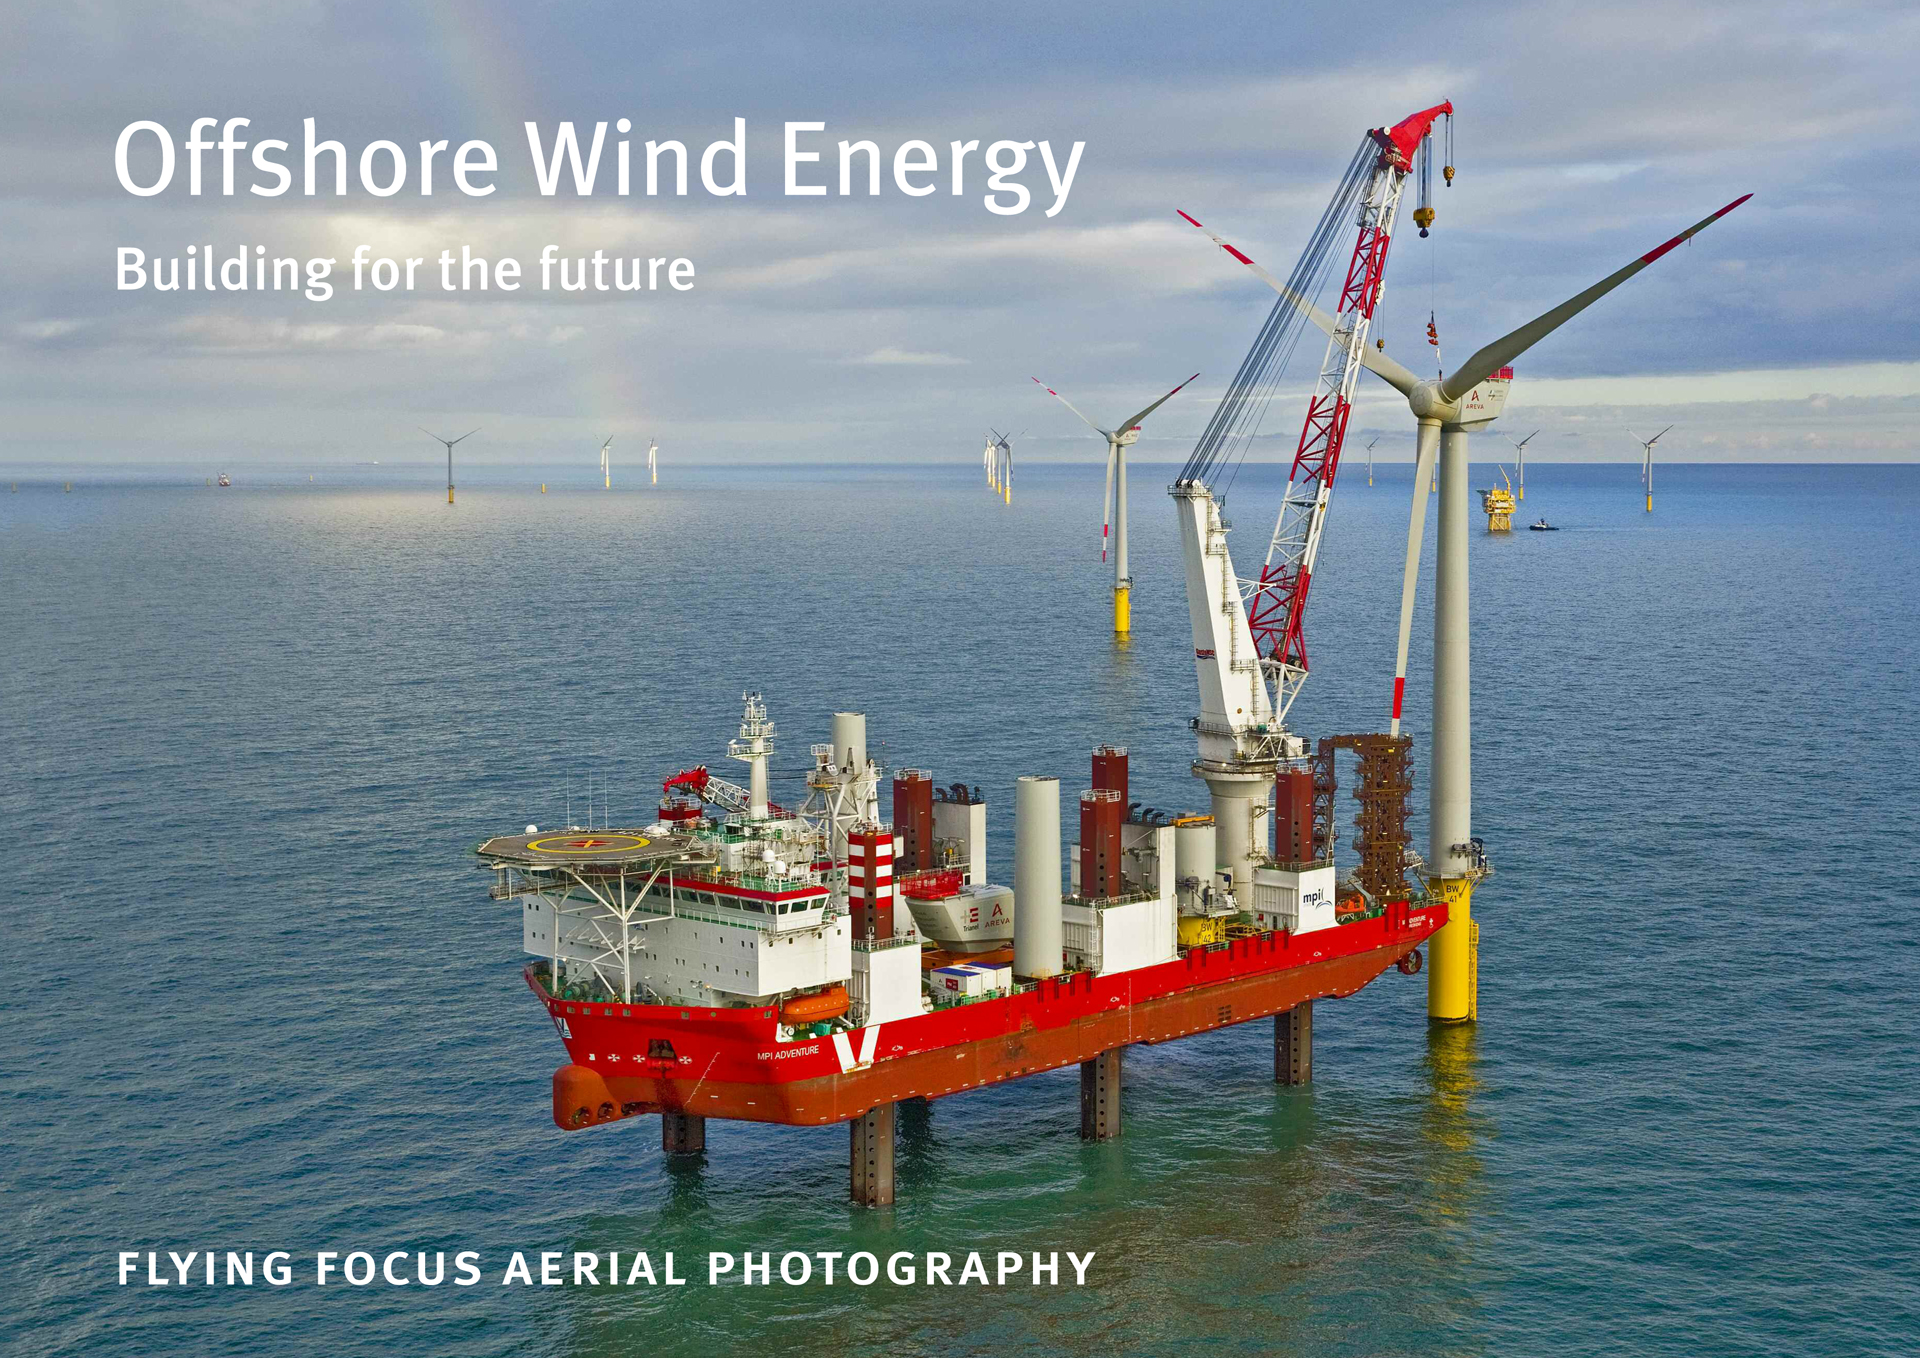 Dutch Offshore- Building for the future